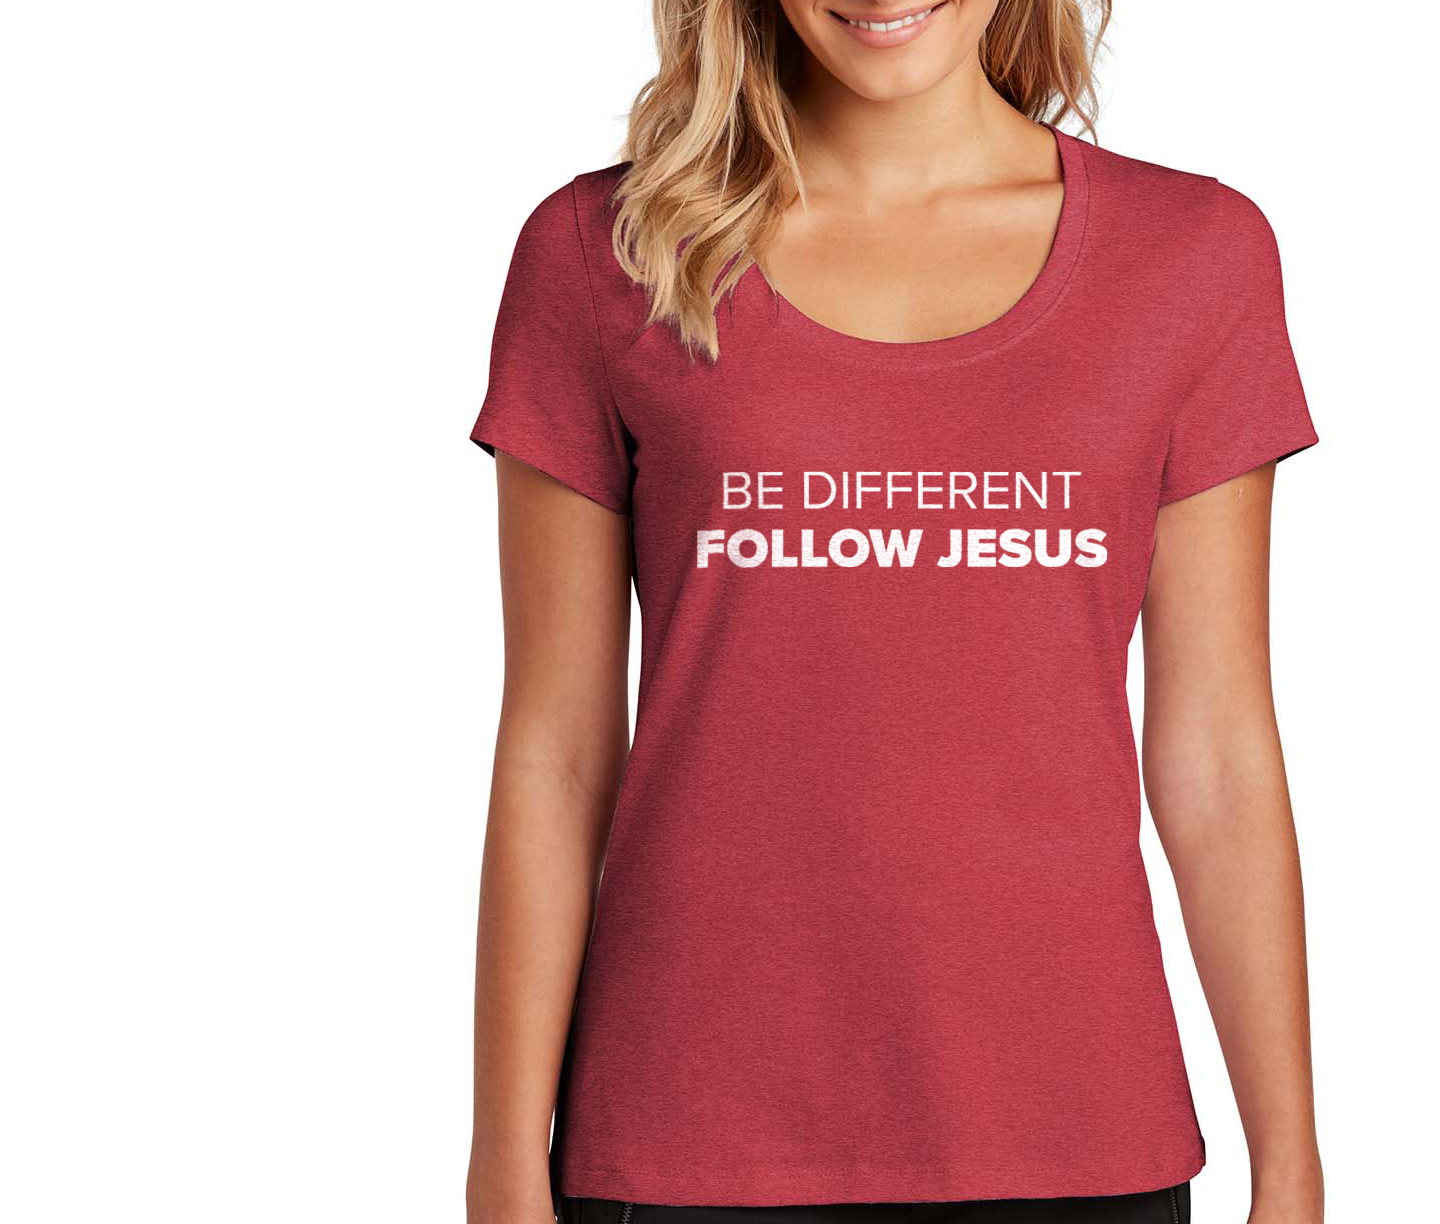 BE DIFFERENT FOLLOW JESUS WOMEN'S RED FRONT - CHRISTIAN CLOTHING